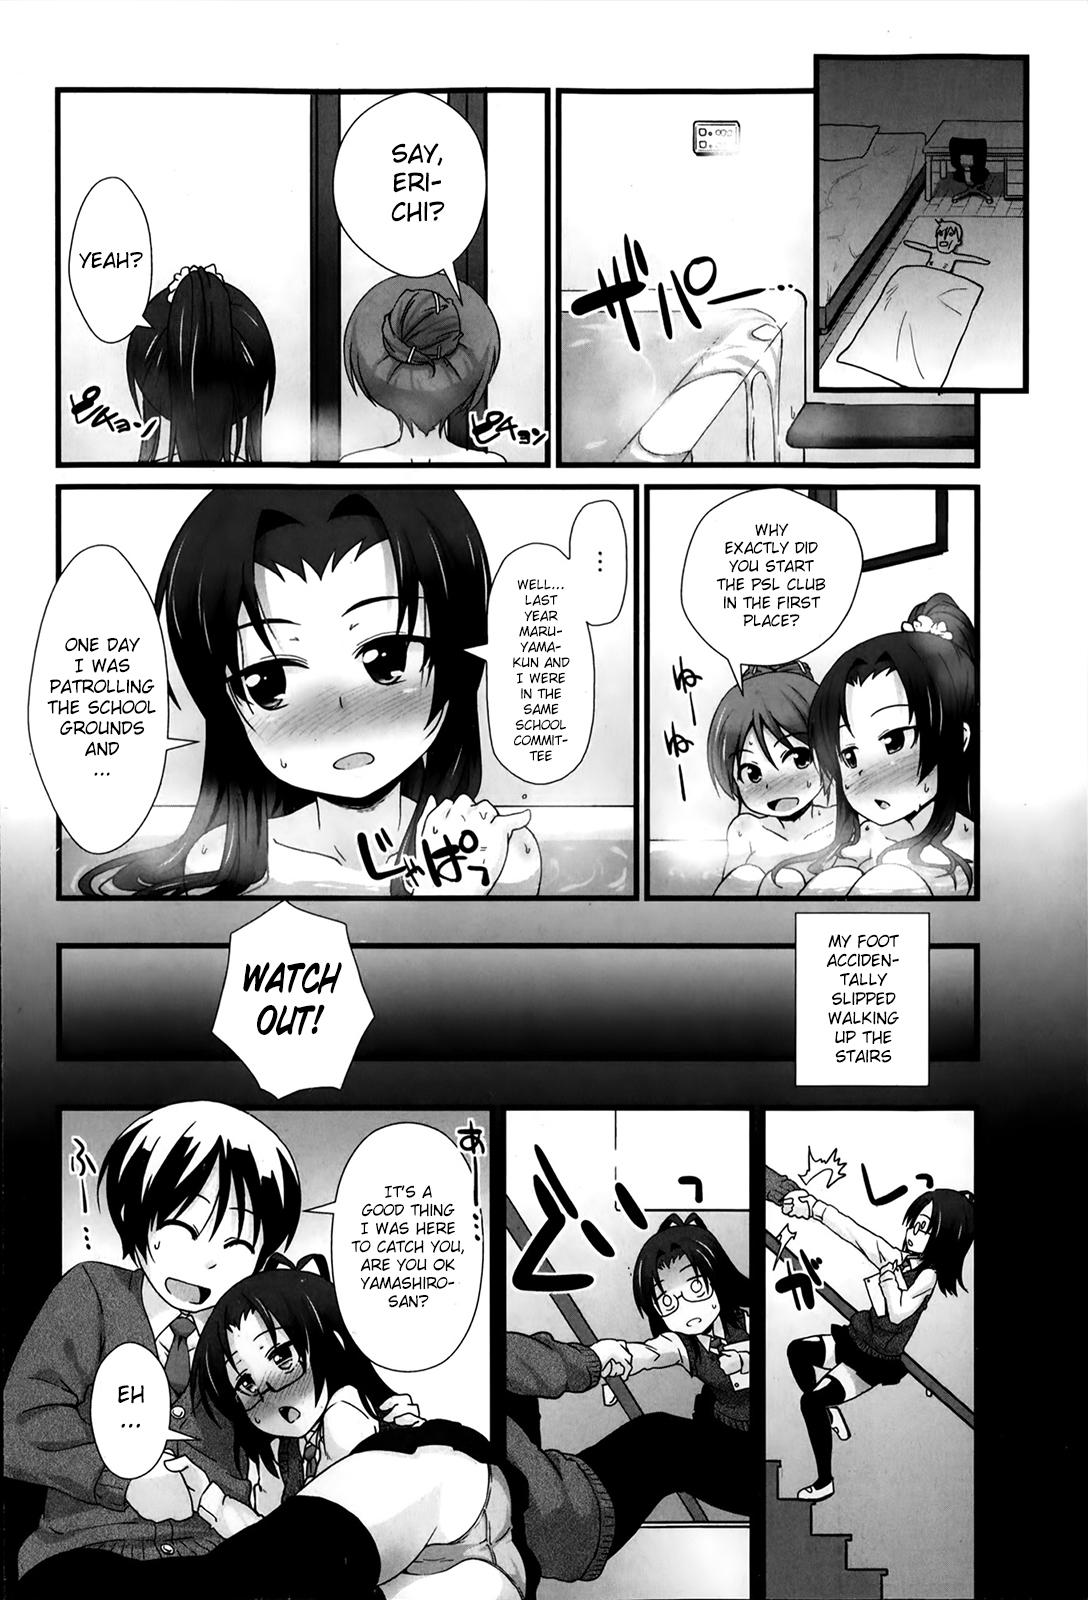 Blowjob PSL-bu e Youkoso | Welcome to the PSL Club First Time - Page 60